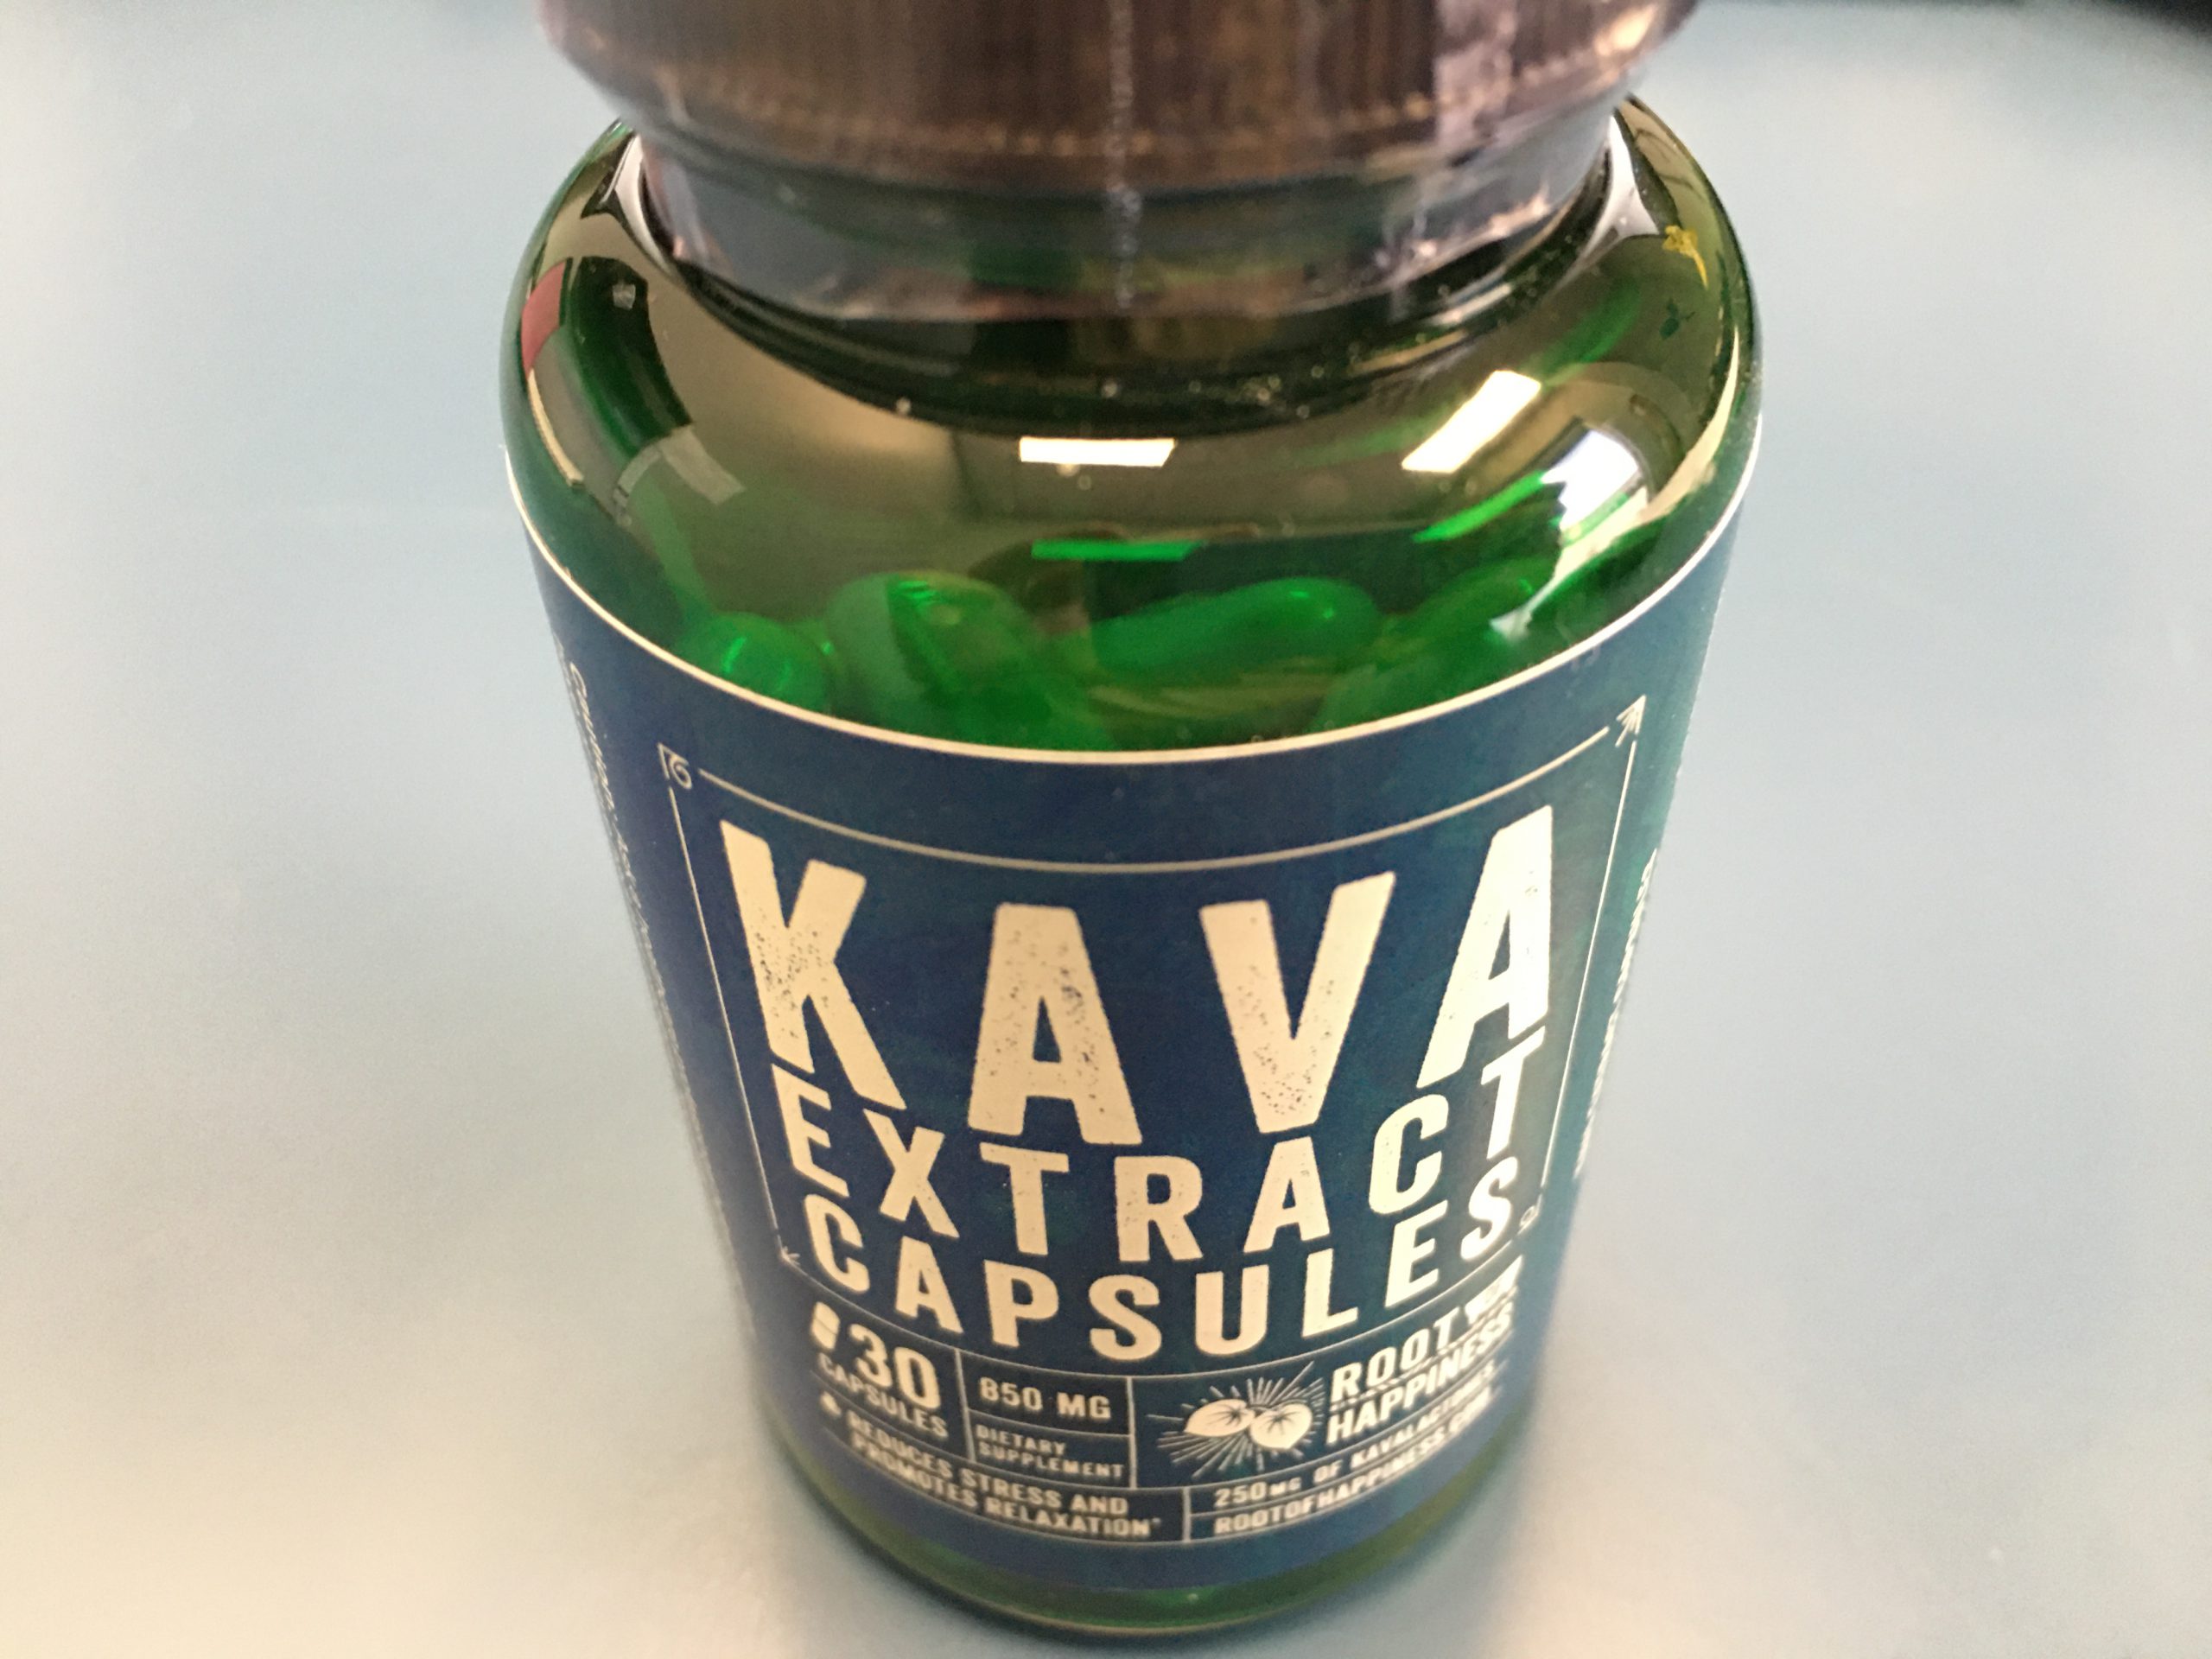 Kava Extract Capsules (30 count) | First Coast Tea Co.